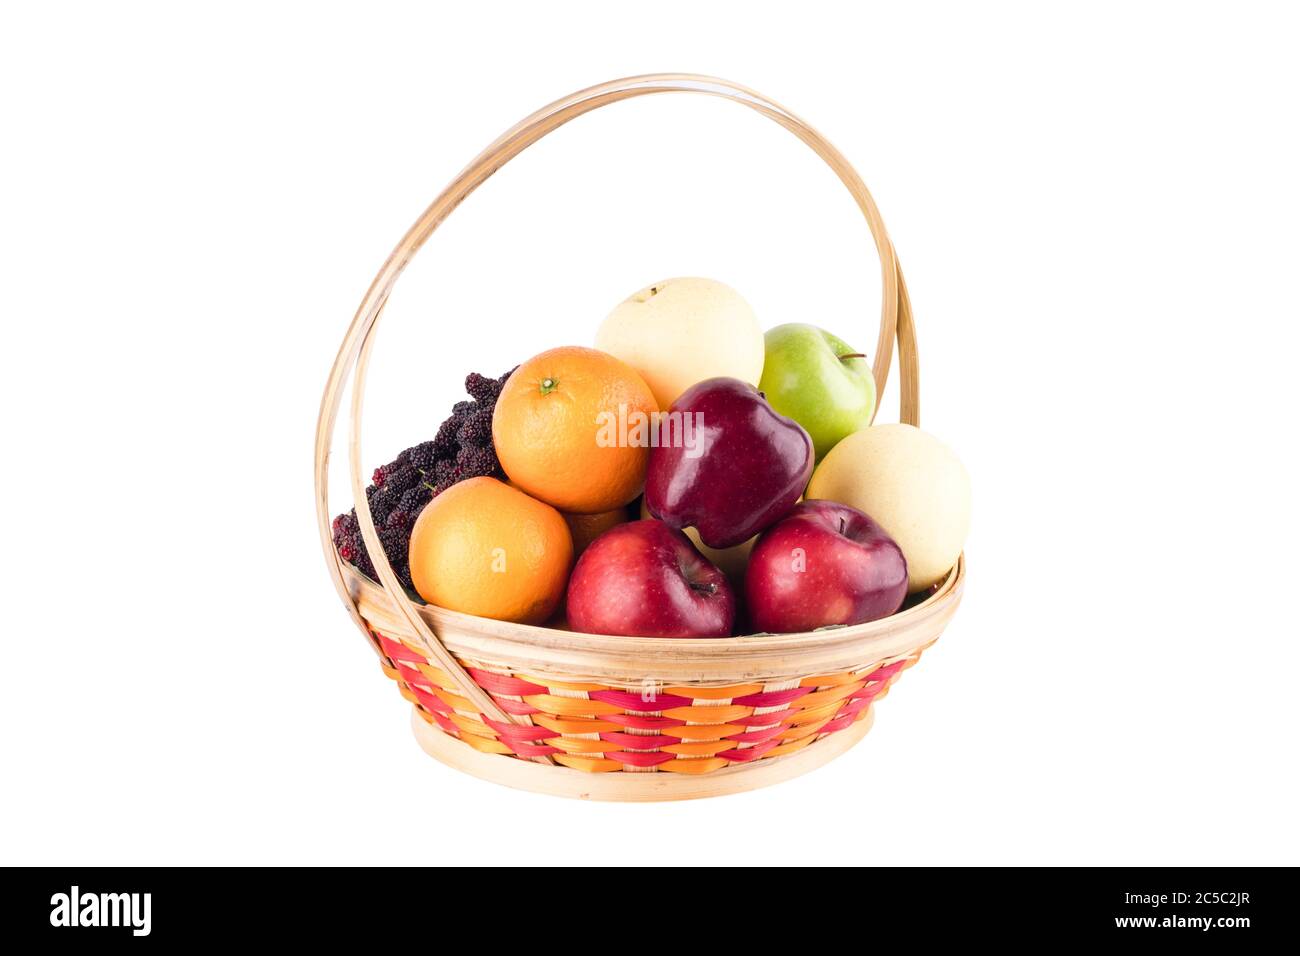 composition assorted fresh fruits such as orange, Chinese pear, mulberry, red apple and green applein  bamboo wicker basket on white background fruit Stock Photo